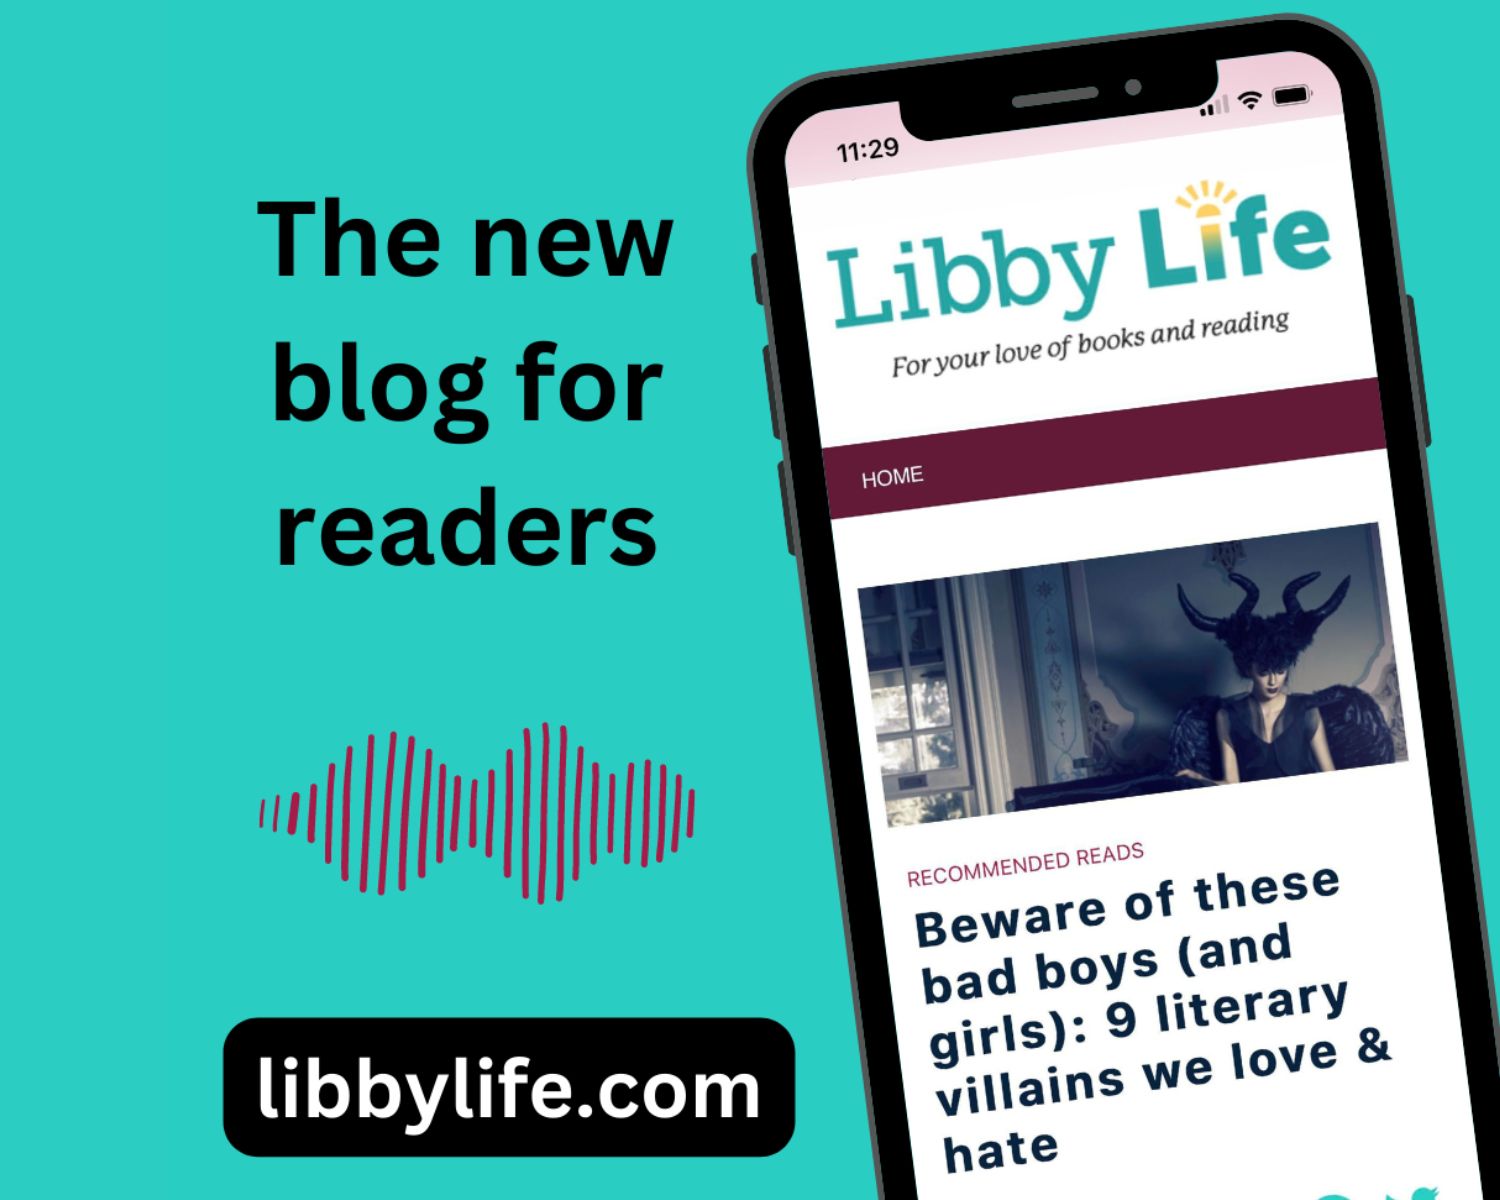 "The new blog for readers" - an iPhone with the Libby Life blog site 